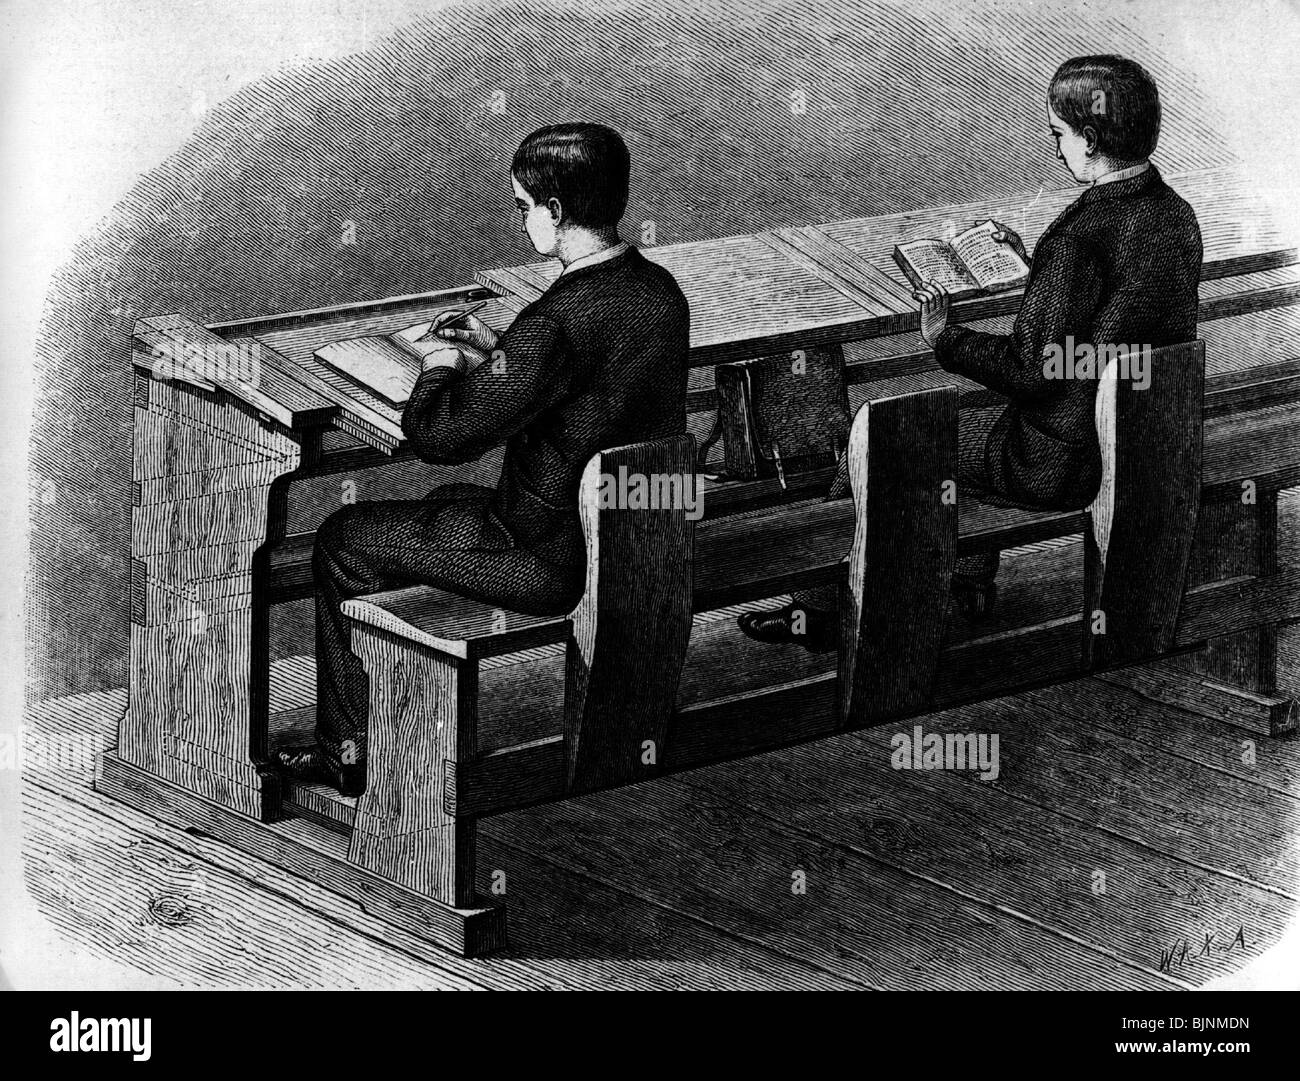 education, school, class, two boys on a school desk, during a lesson, wood engraving, 19th century, historic, historical, bench, table, writing, reading, working, taking notes, pen, quill, learning, boy, people, Stock Photo